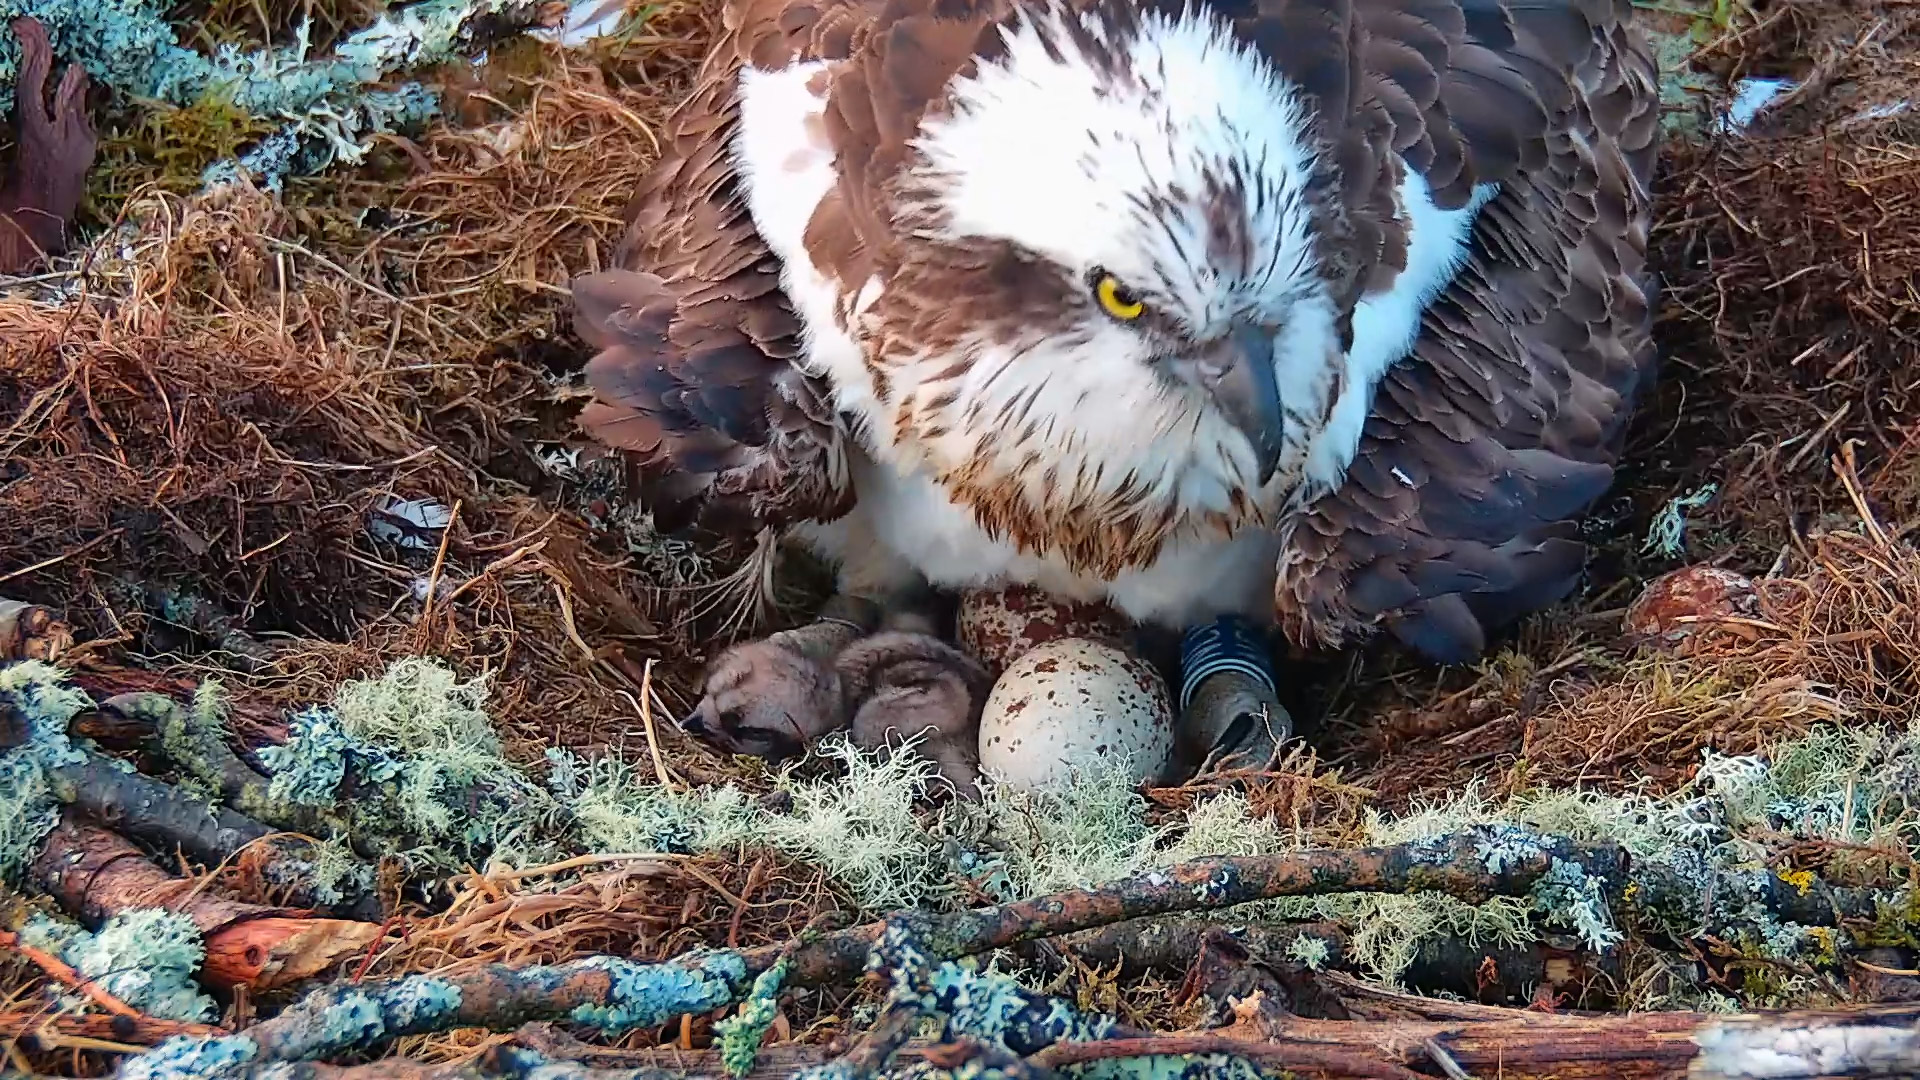 The two remaining eggs laid this season are expected to hatch by the end of the week.